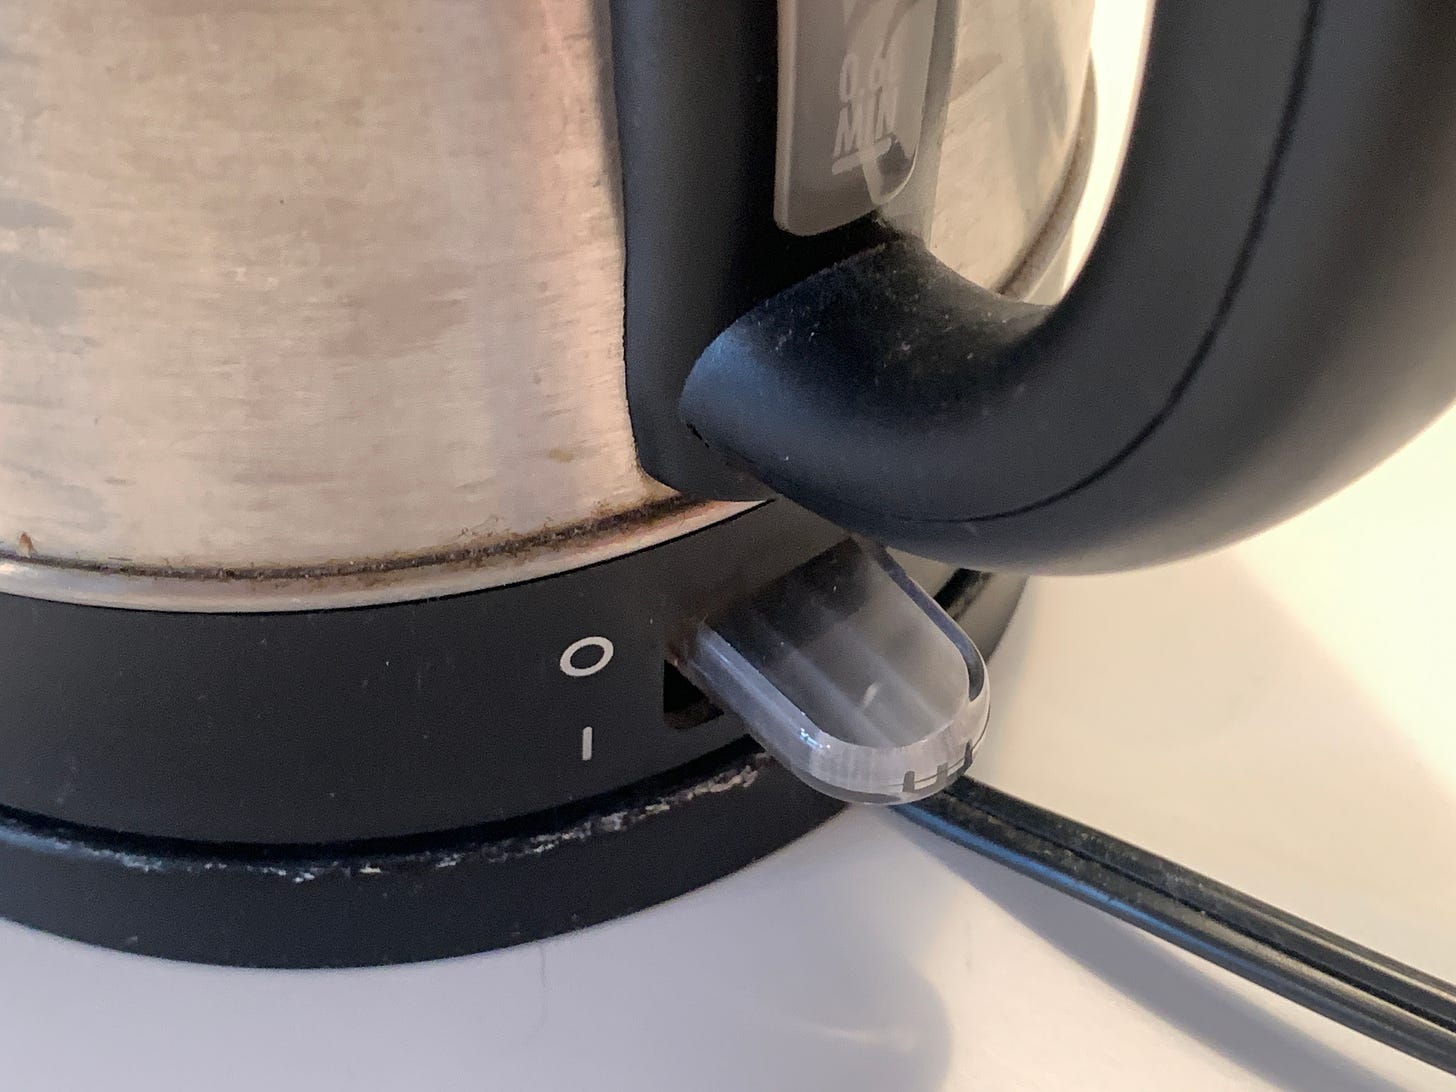 Closeup of failed kettle switch